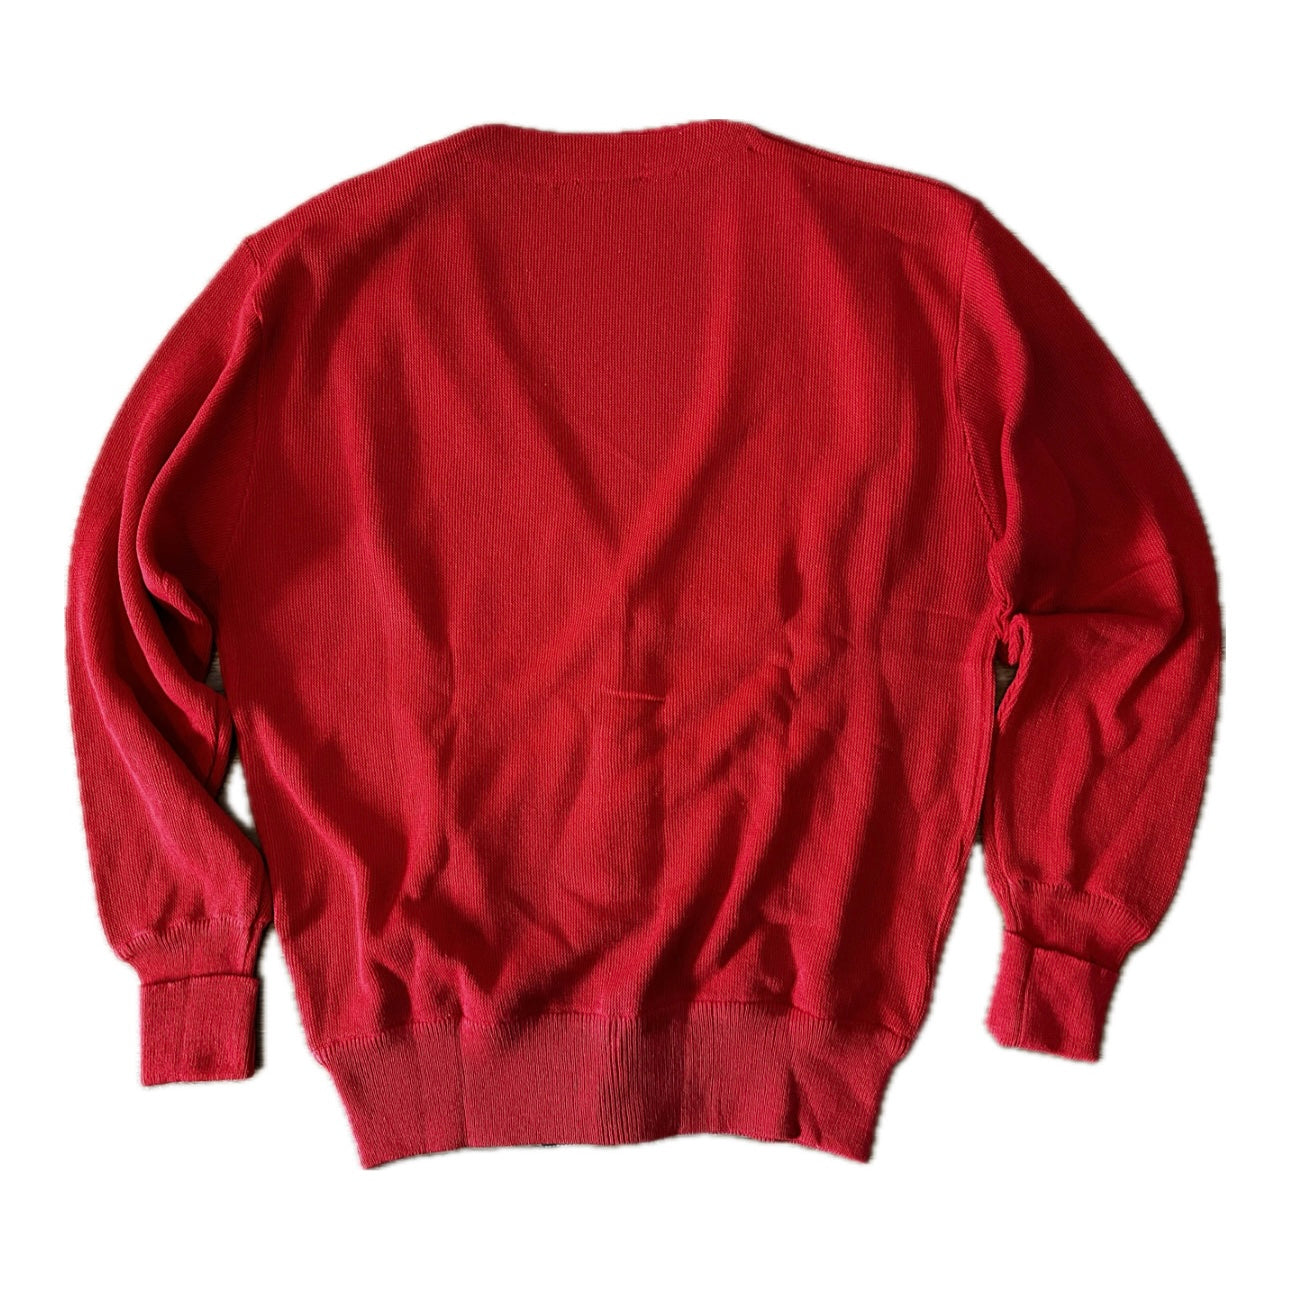 Burberrys Vintage 80s Cardigan Red - Deadstock - 5 / M - Made in Spain